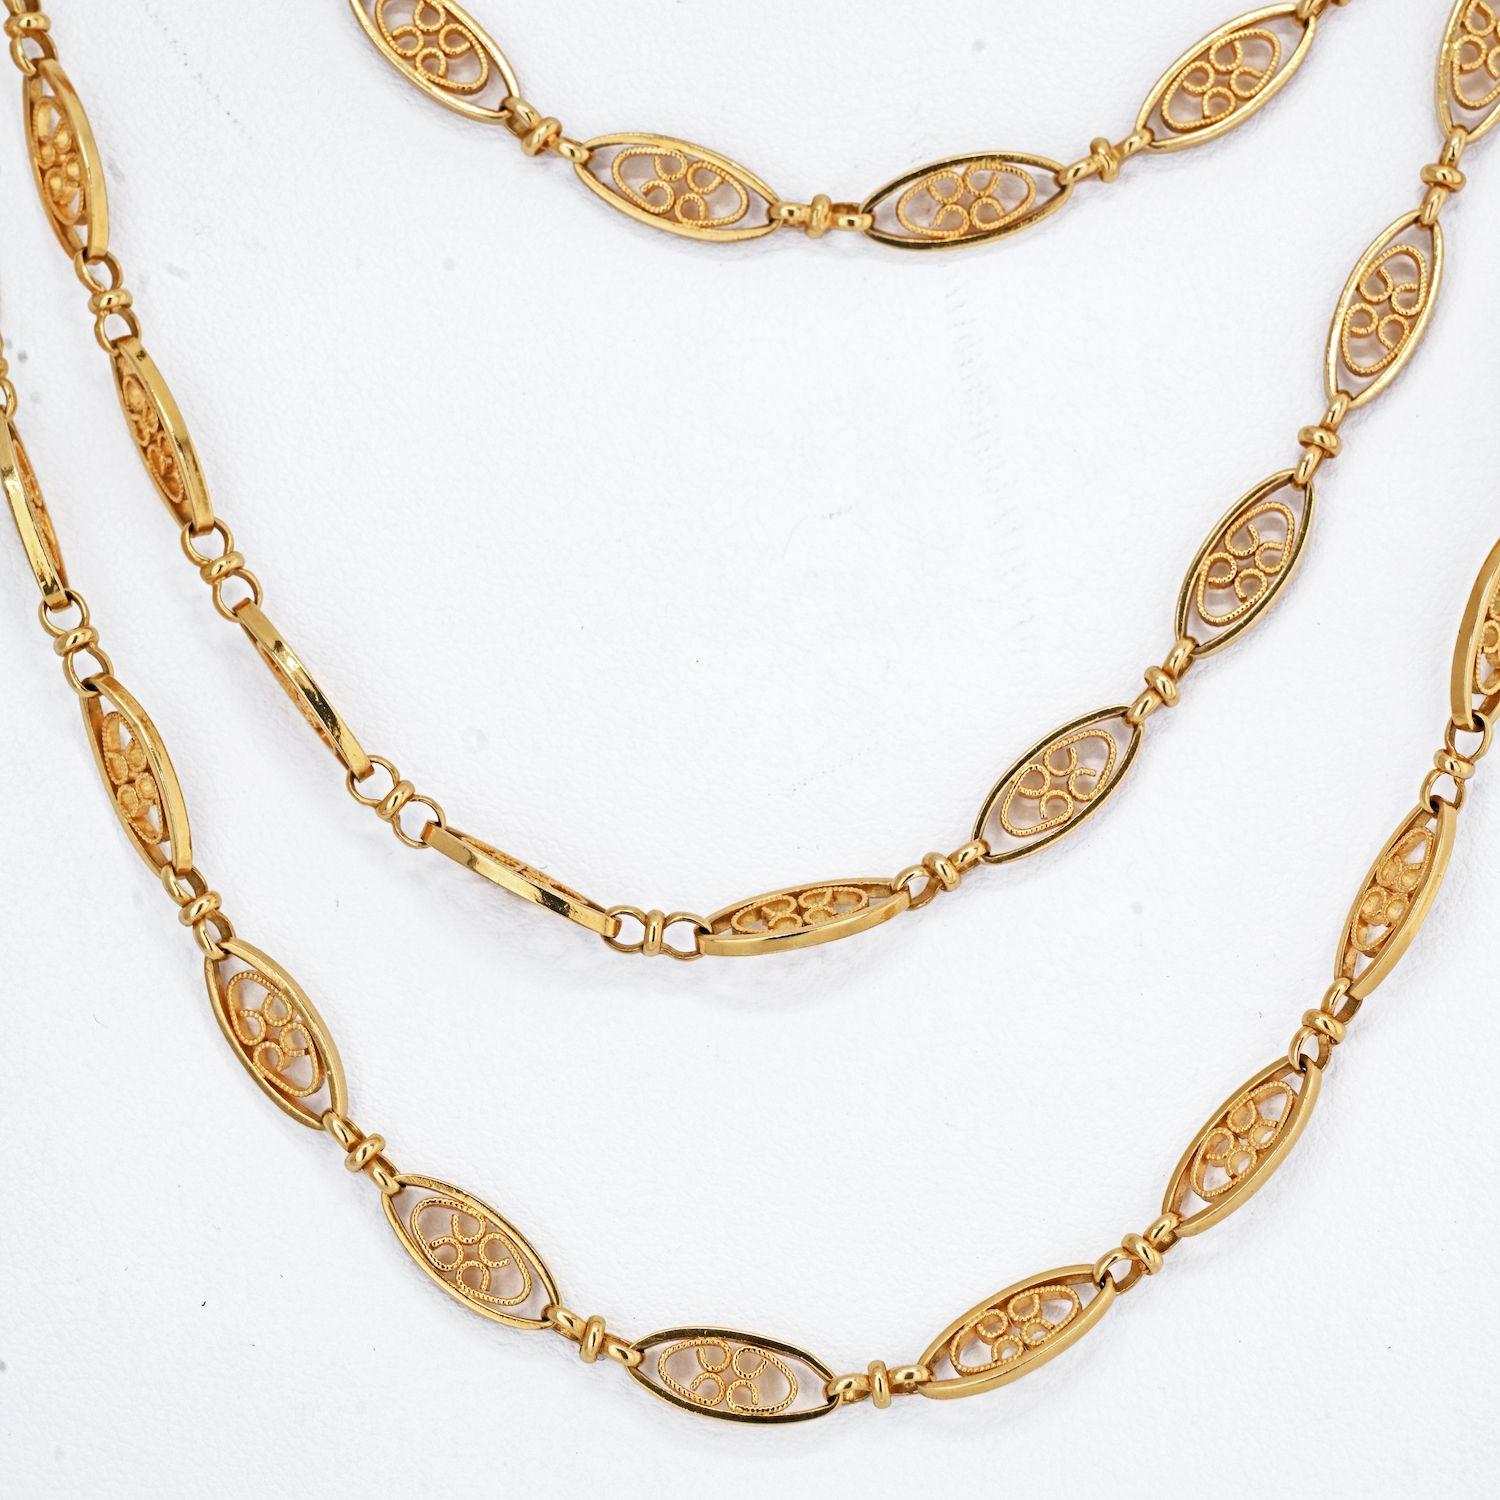 This antique gold long chain necklace is composed of rounded navette-form links with interior wire work motifs joined by circular trace link chain. Its flexibility and delicate construction make it light and versatile, easy to pair with